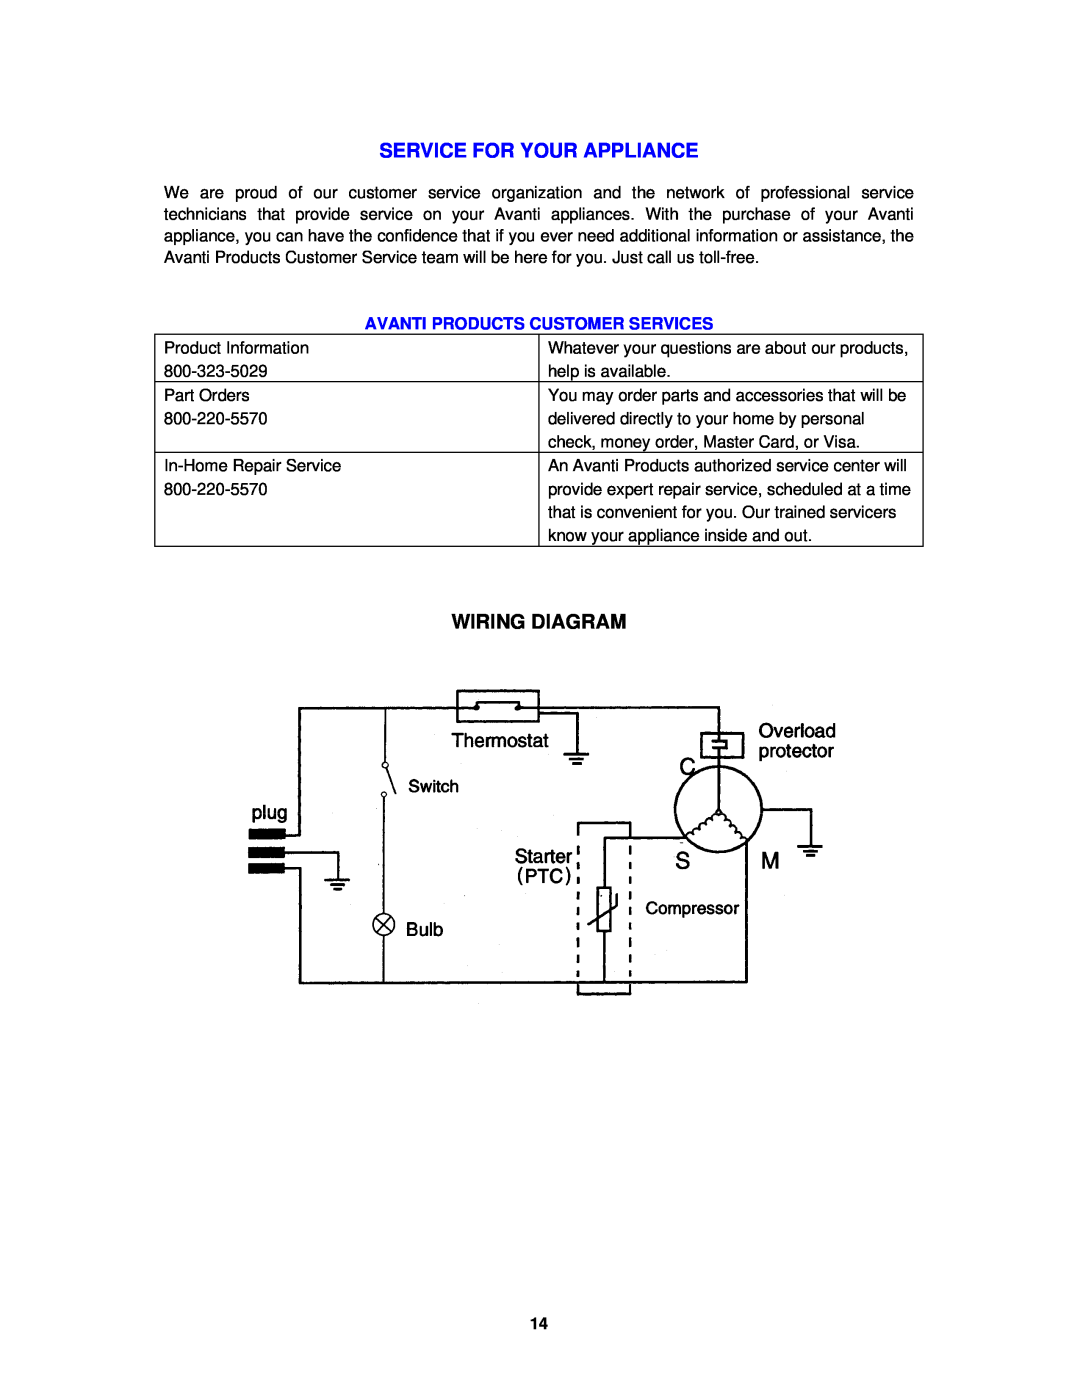 Avanti BCA4421WL instruction manual Service For Your Appliance, Wiring Diagram, Avanti Products Customer Services 